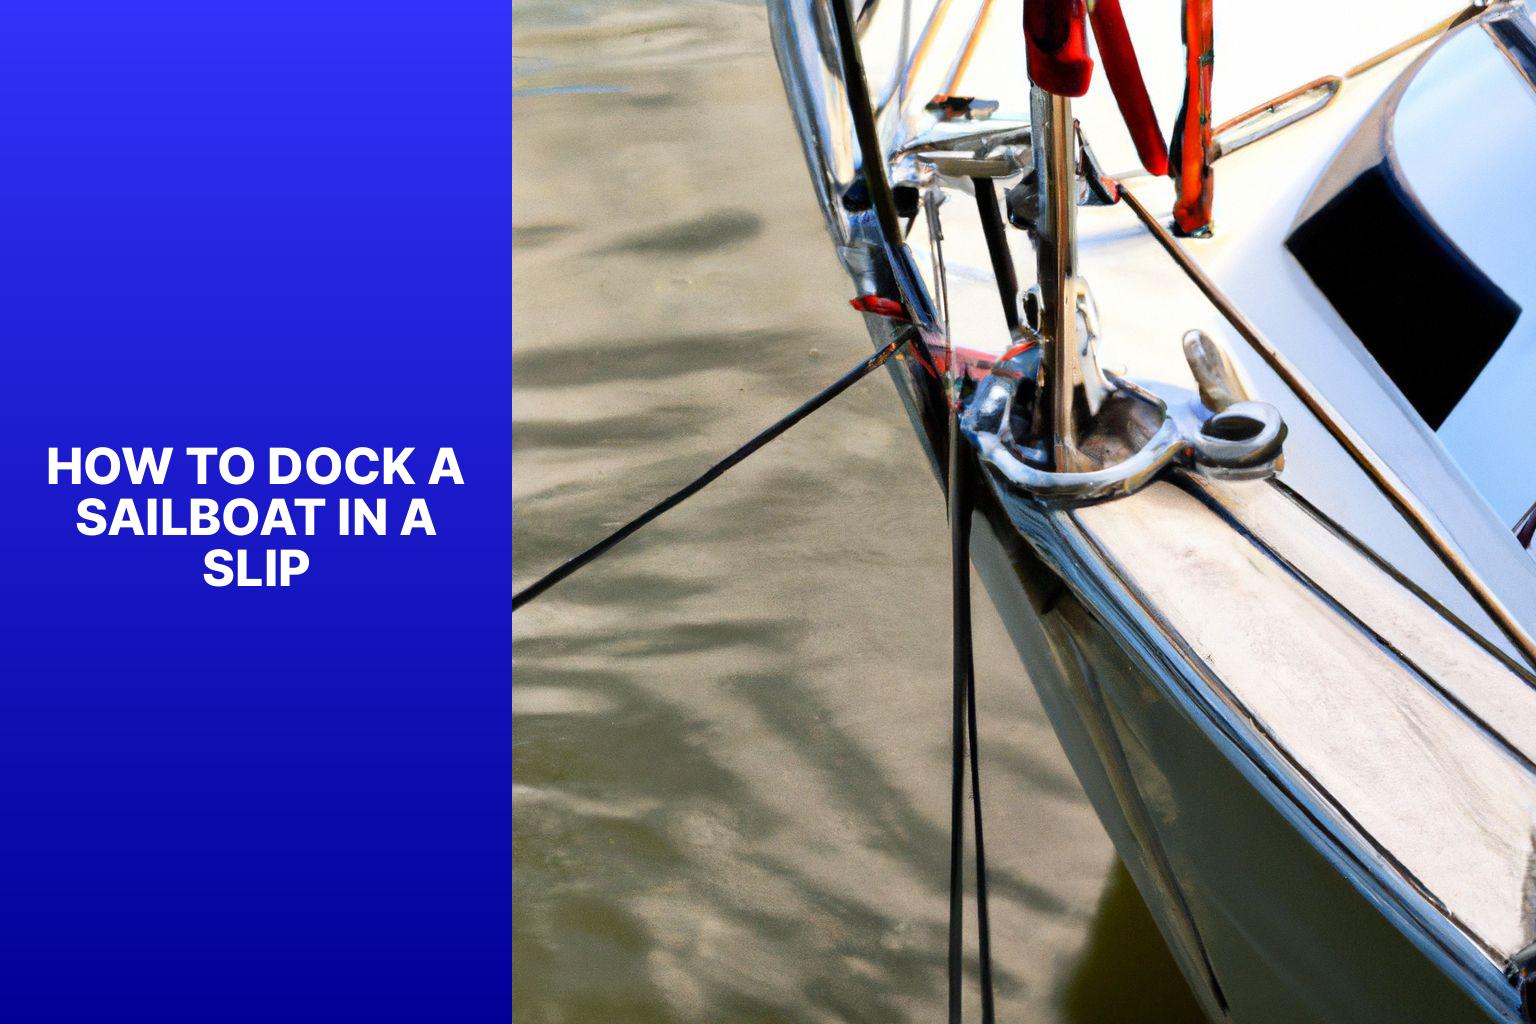 The Ultimate Guide on How to Professionally Dock a Sailboat in a Slip